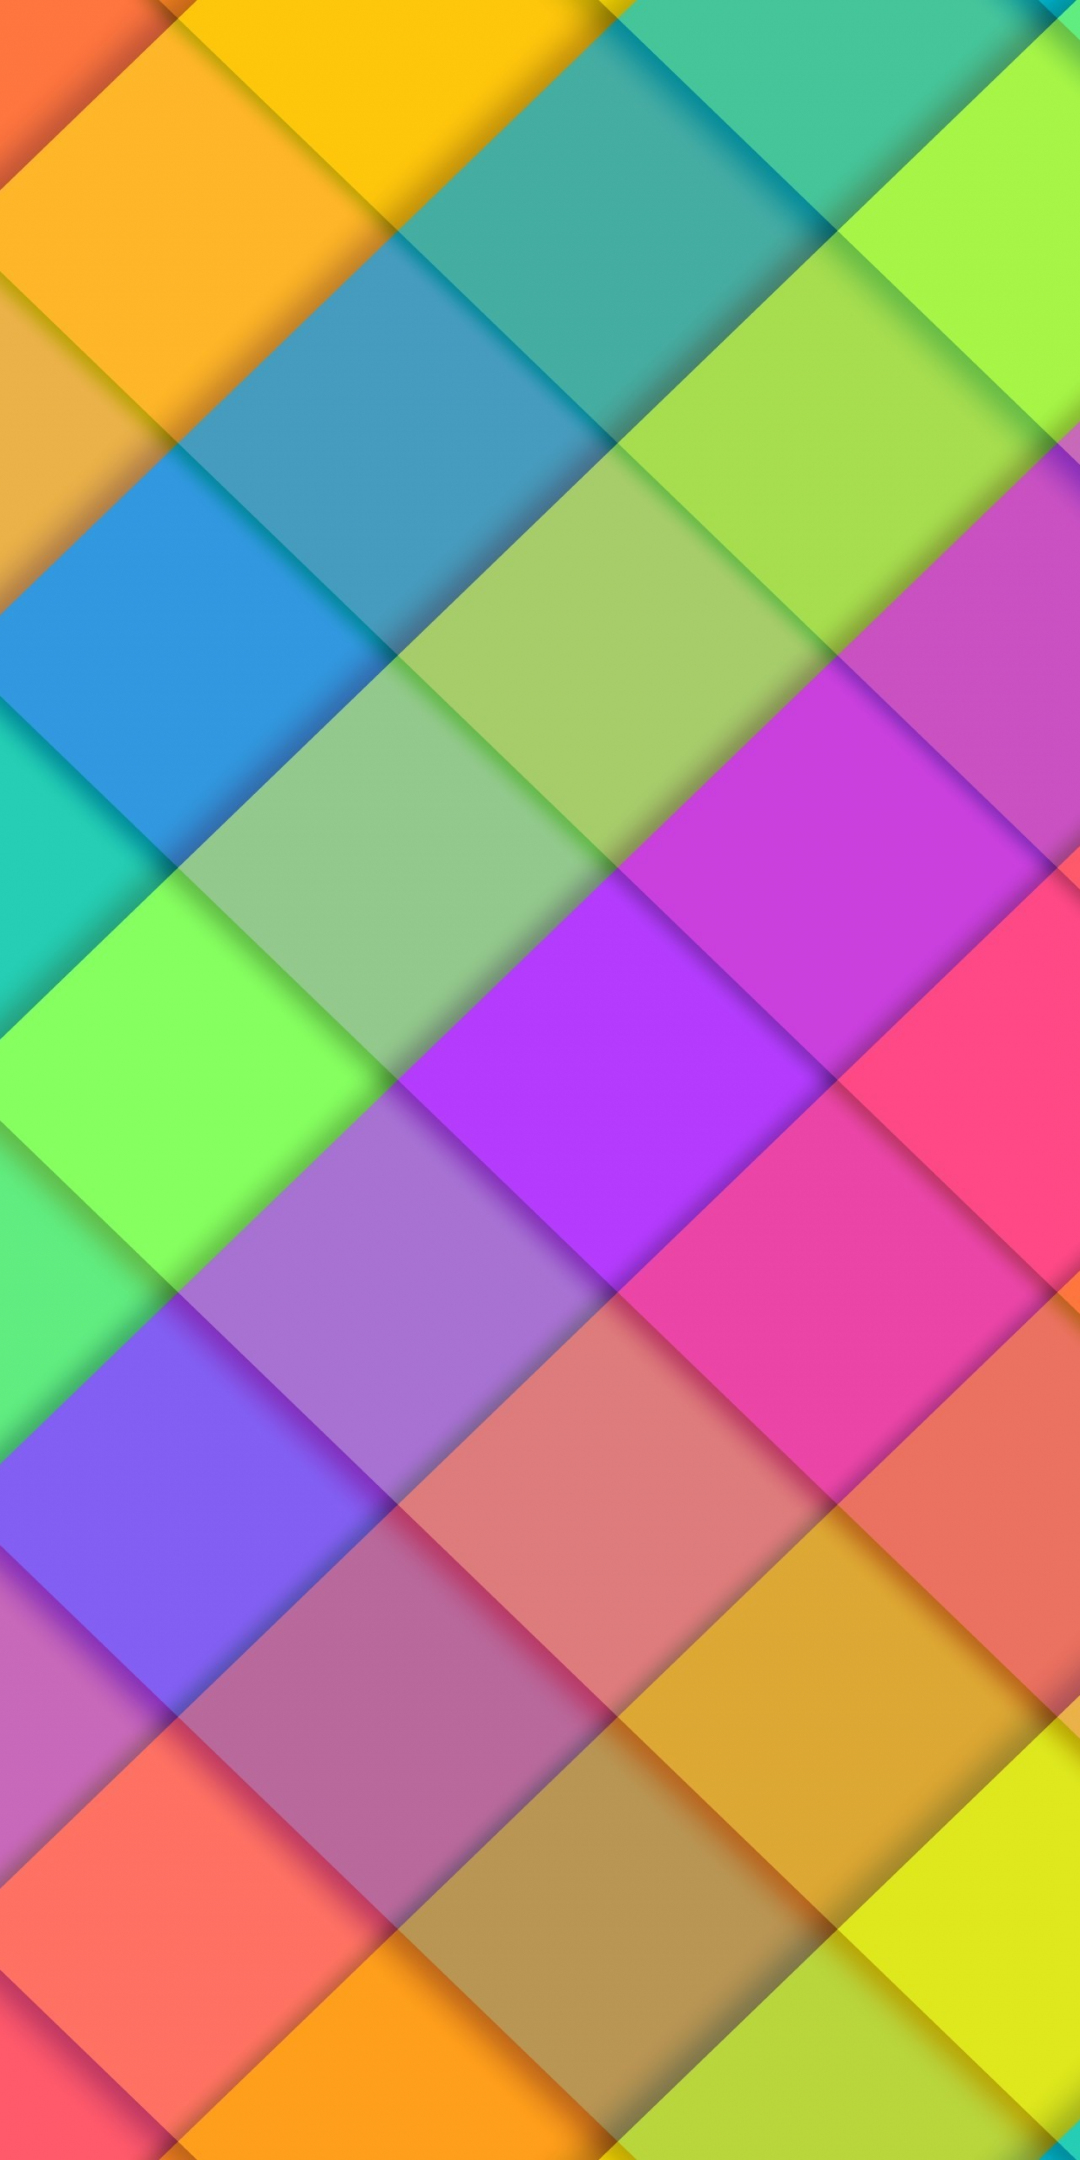 Material design, colorful, squares, abstract, 1080x2160 wallpaper